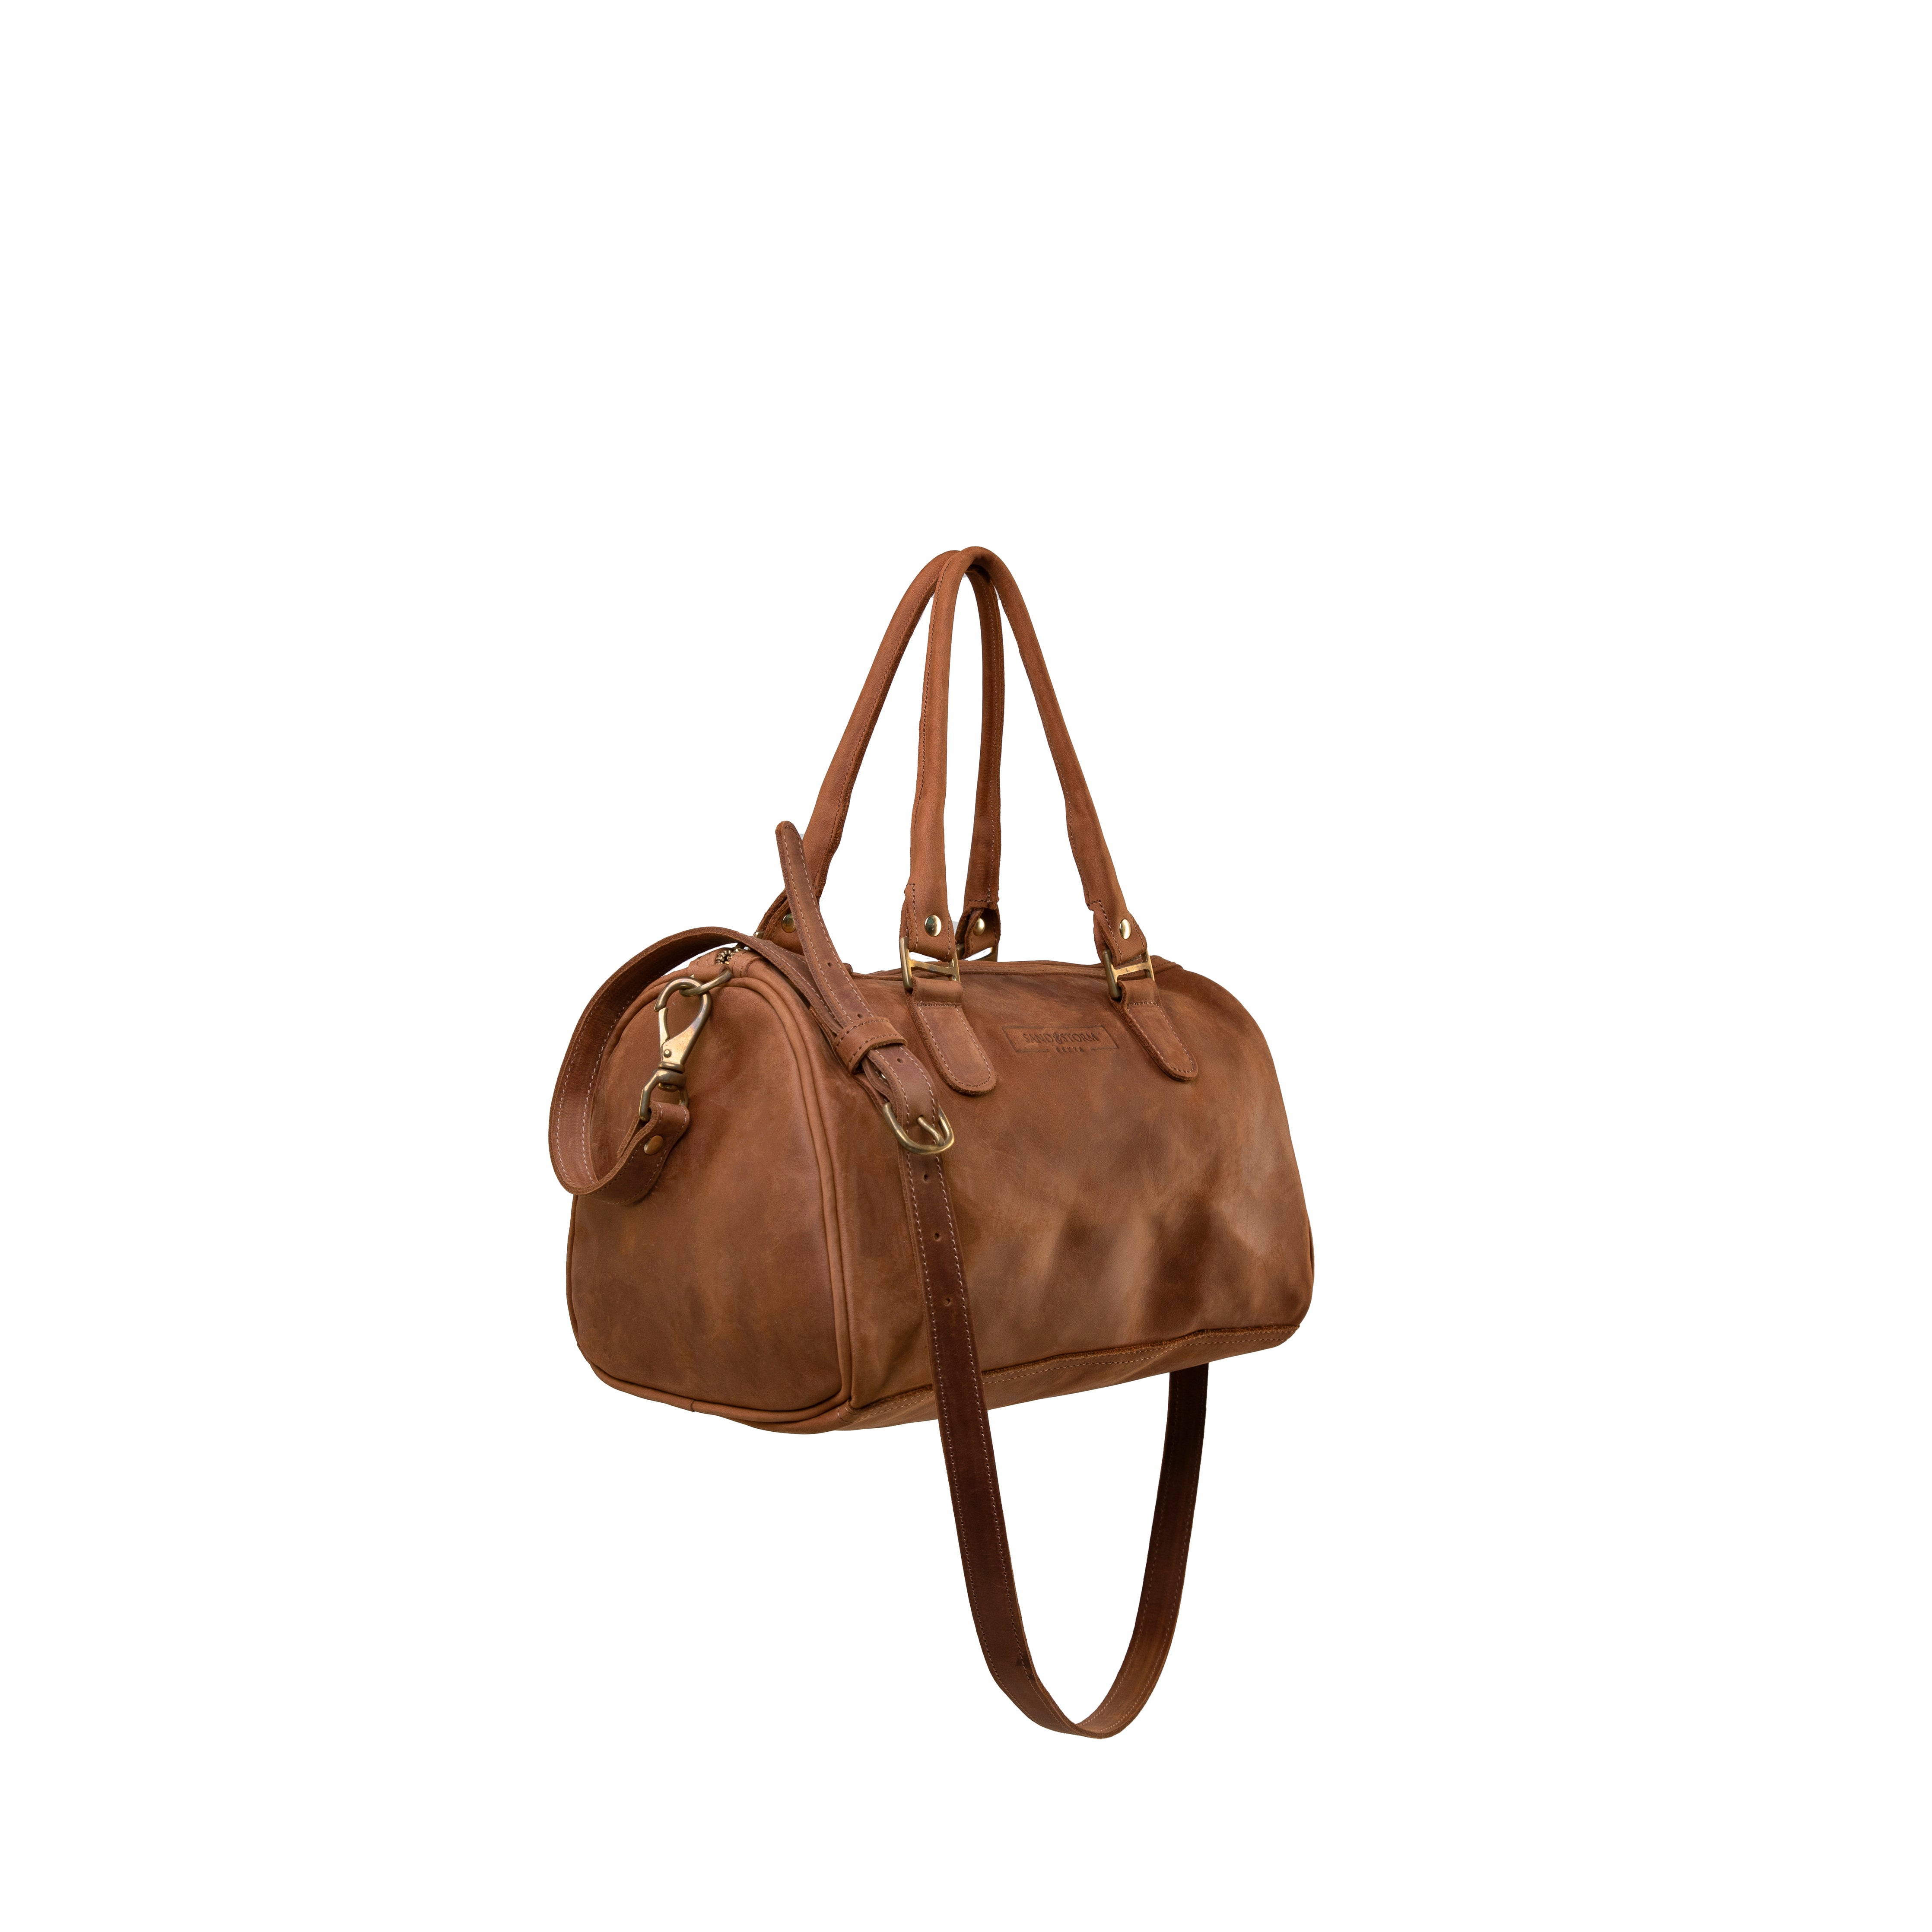 Pull-up Leather Virginia Bag